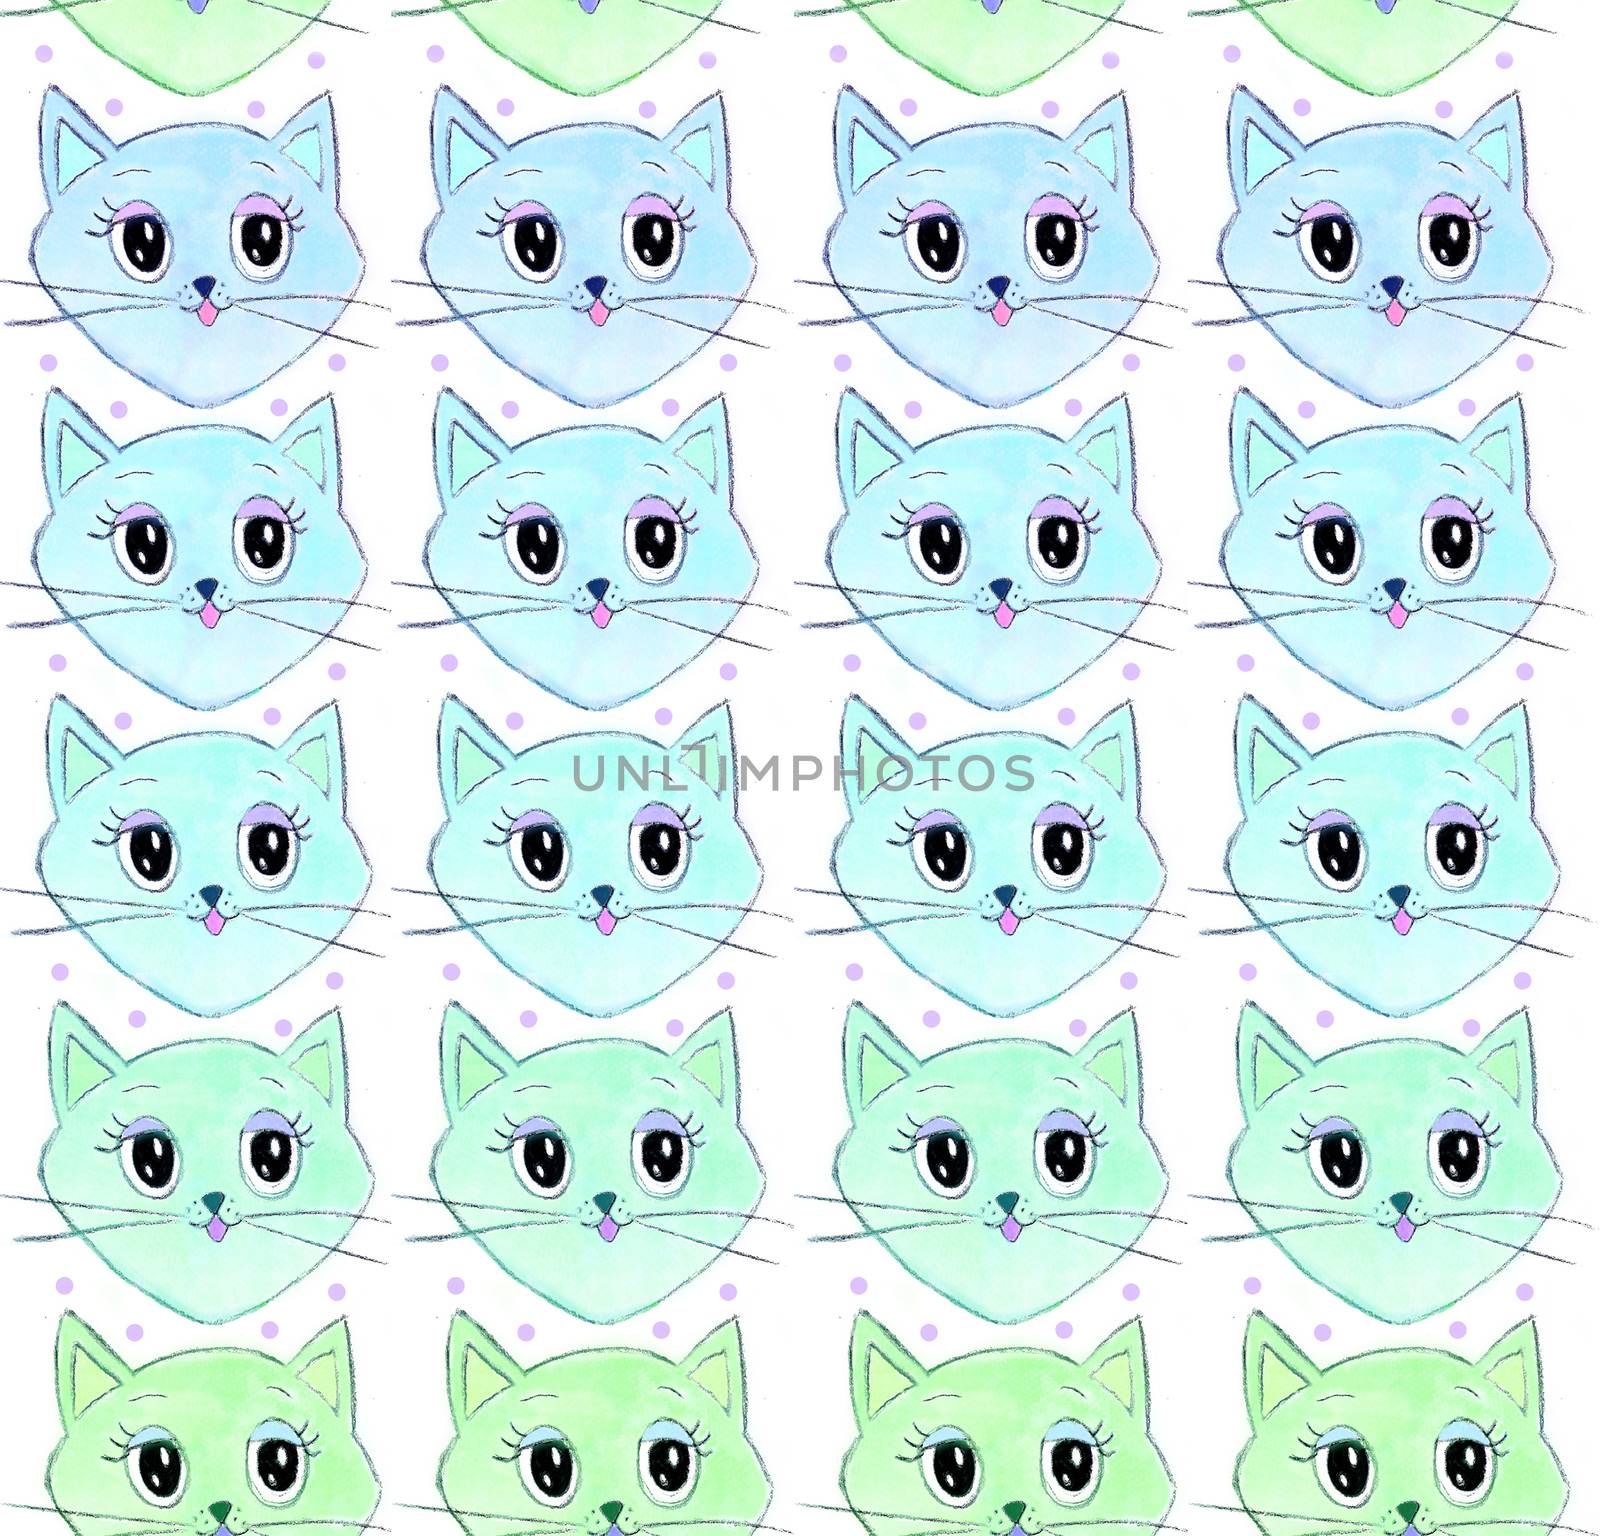 Colorful seamless pattern with funny cats by JackyBrown